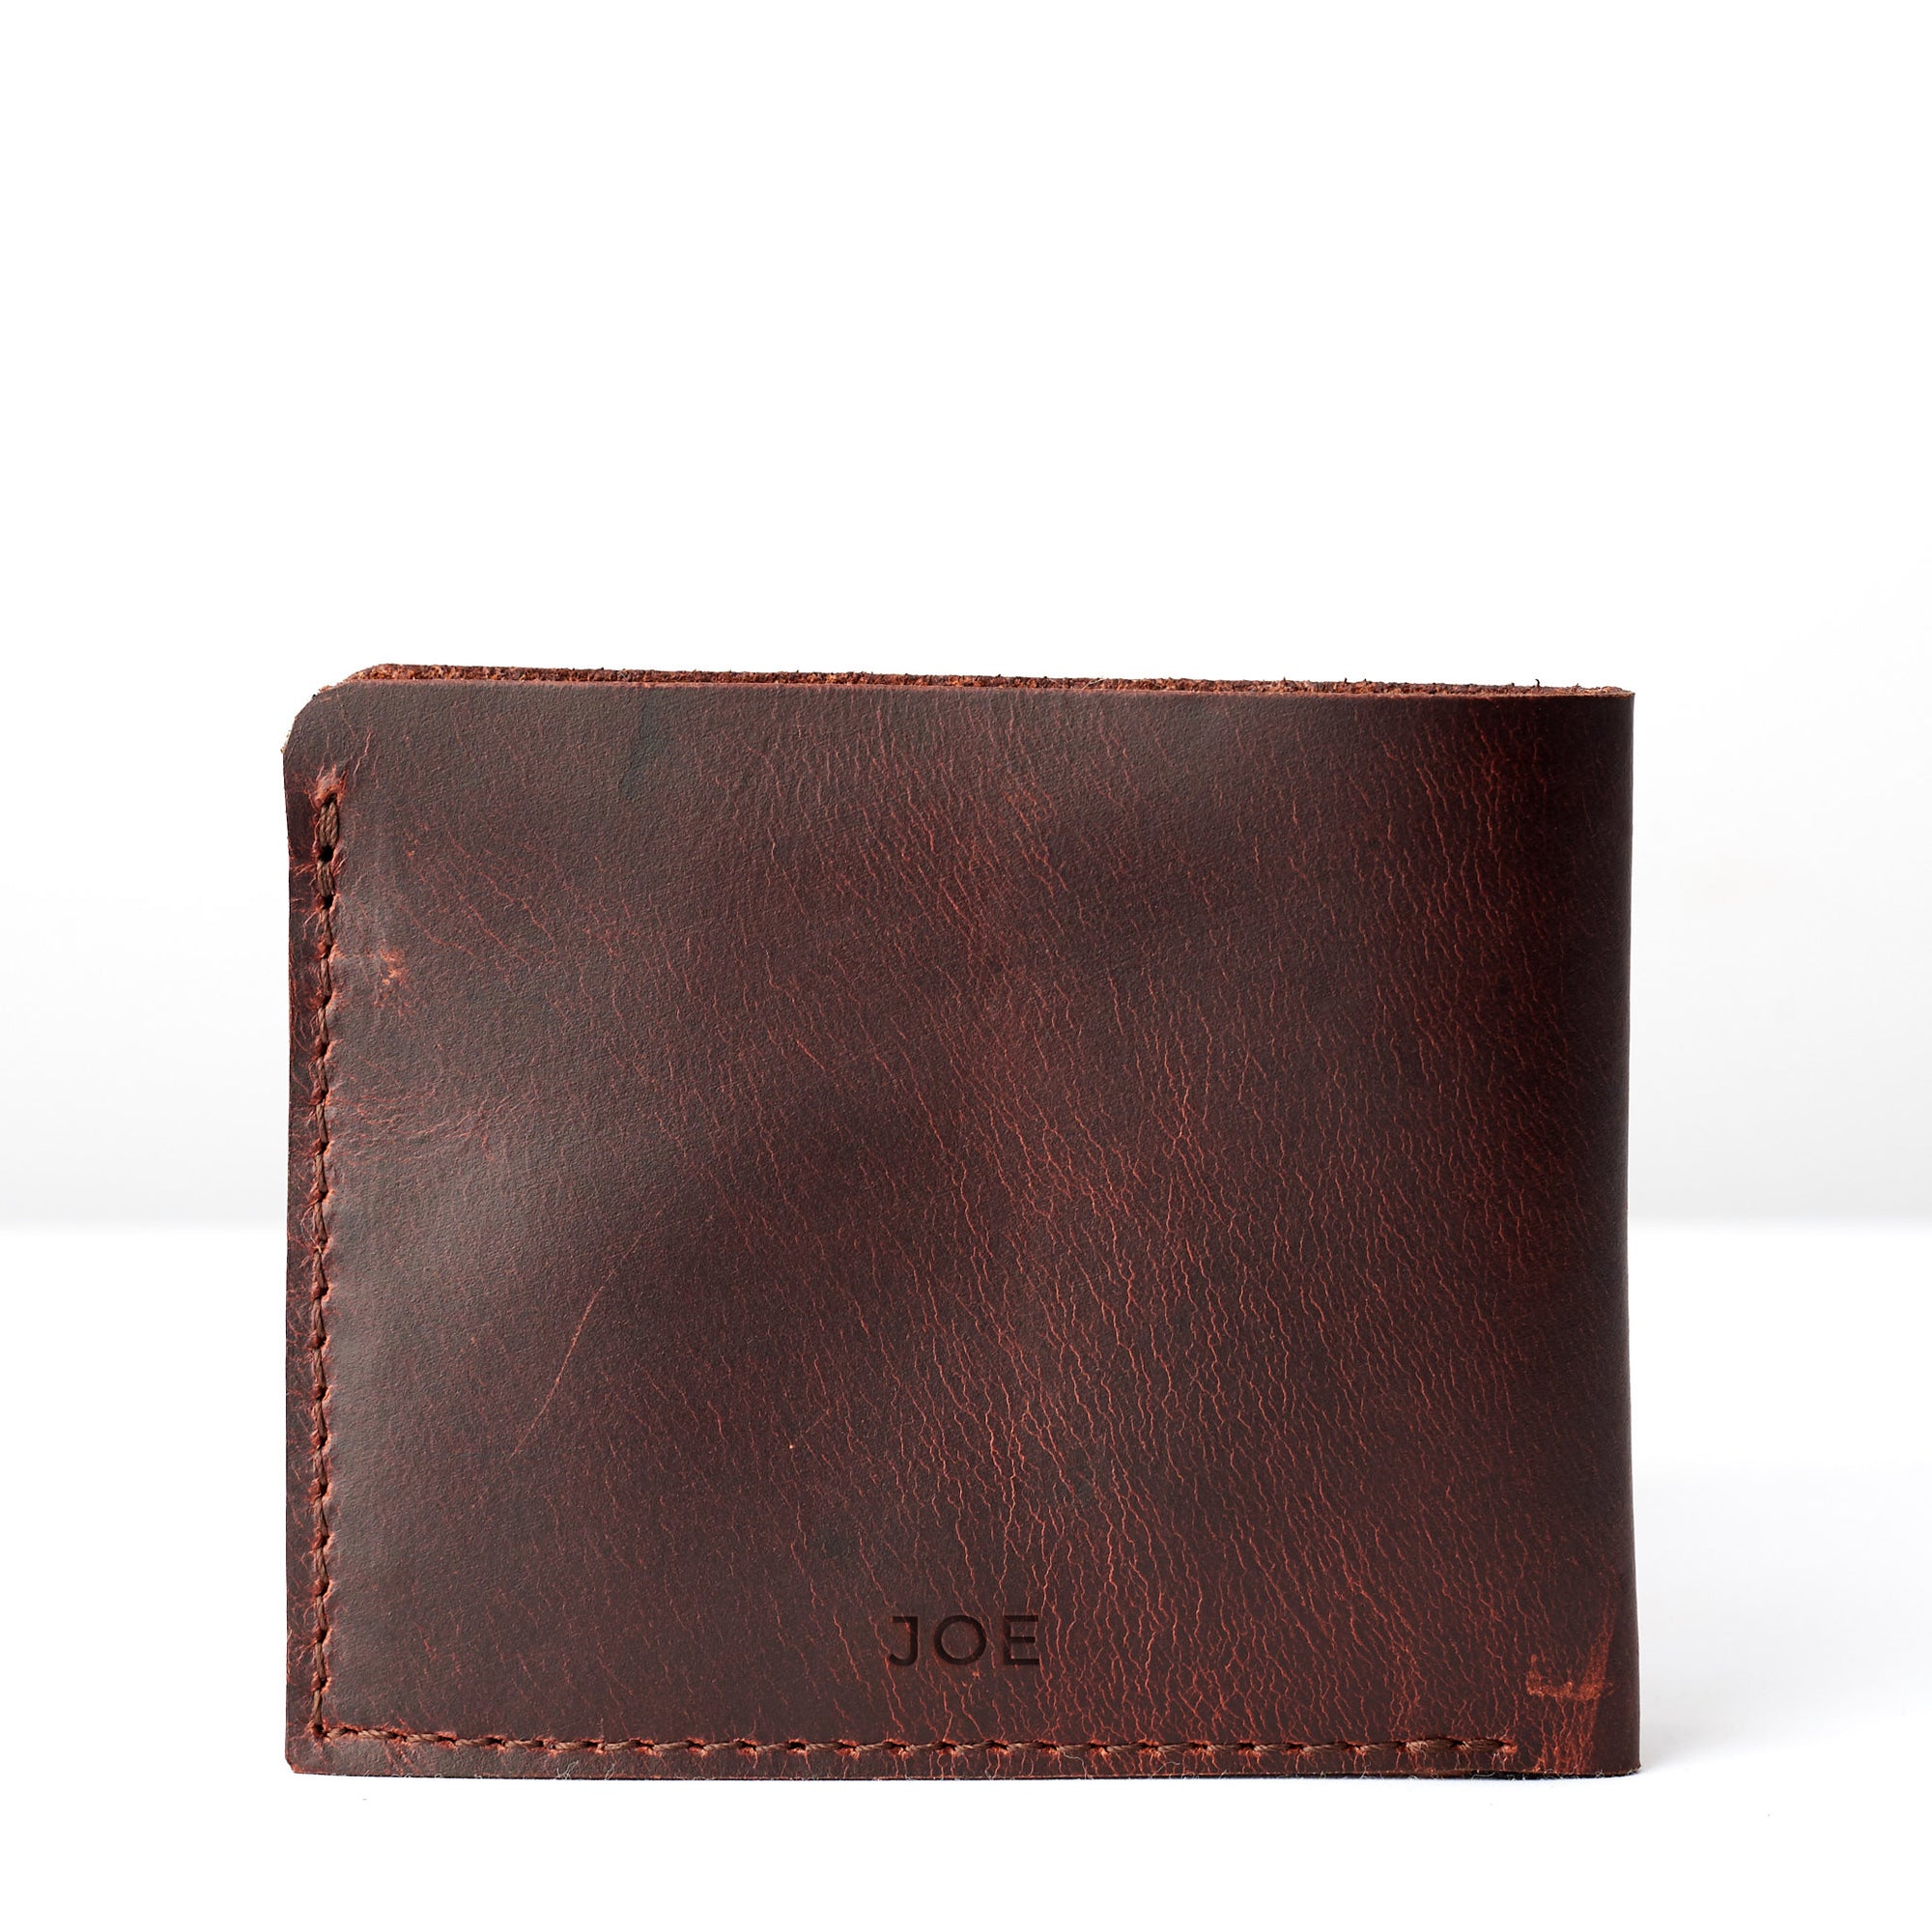 Engraving monogram . Leather coñac slim wallet gifts for men handmade accessories. minimalist full grain leather thin wallet. Made by Capra Leather. 